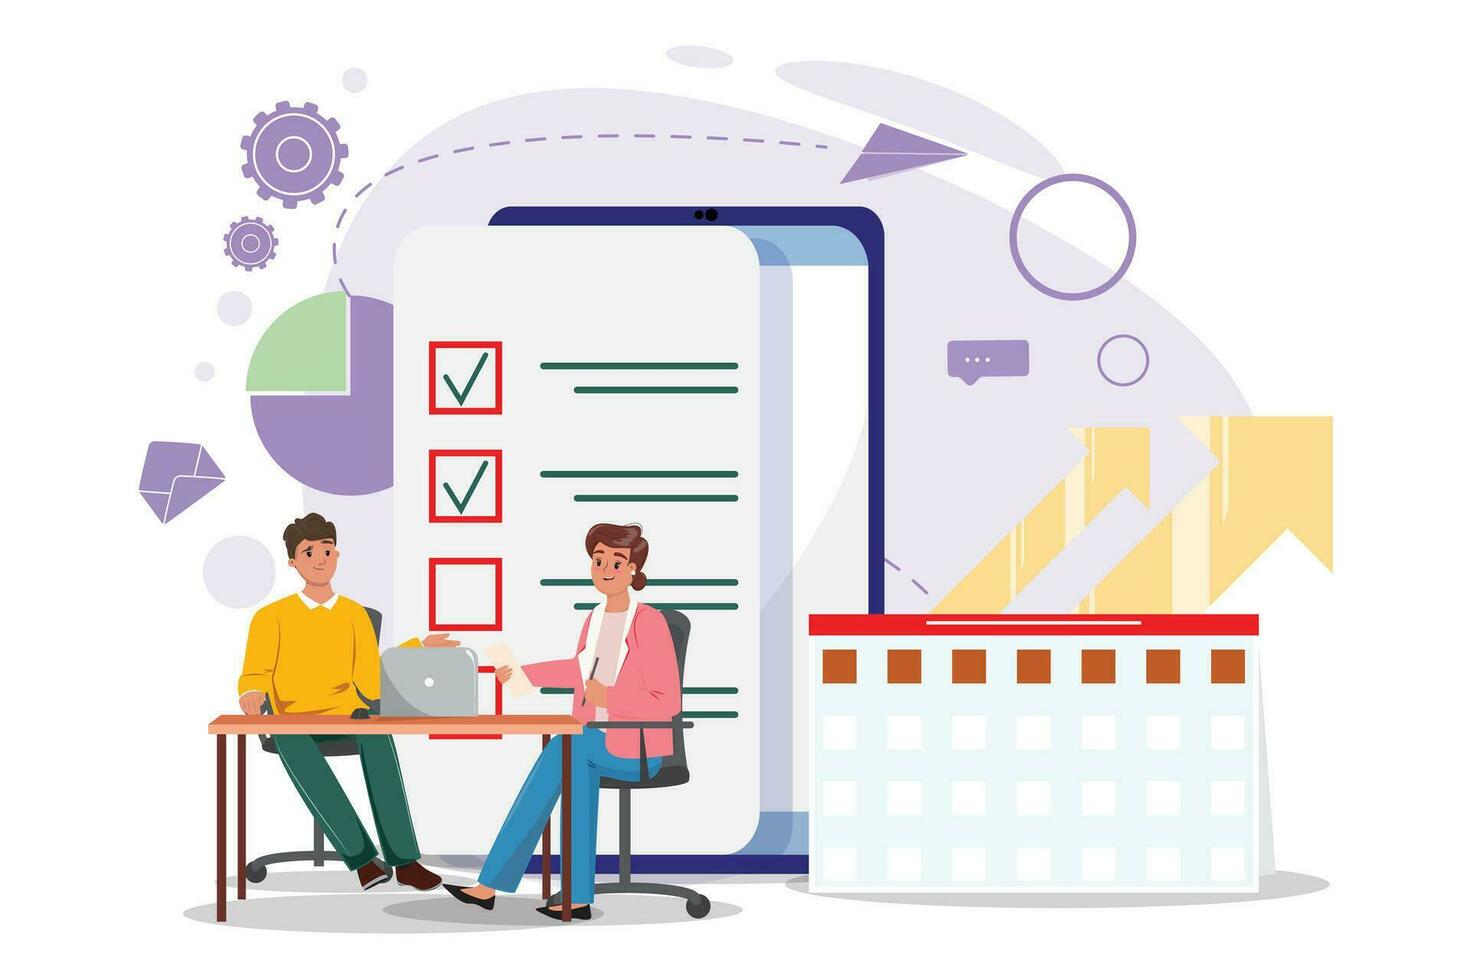 Two colleagues sitting at the desk next to the big checklist. Cartoon people making plans, tasks, to do list, timetables, business concept illustration vector